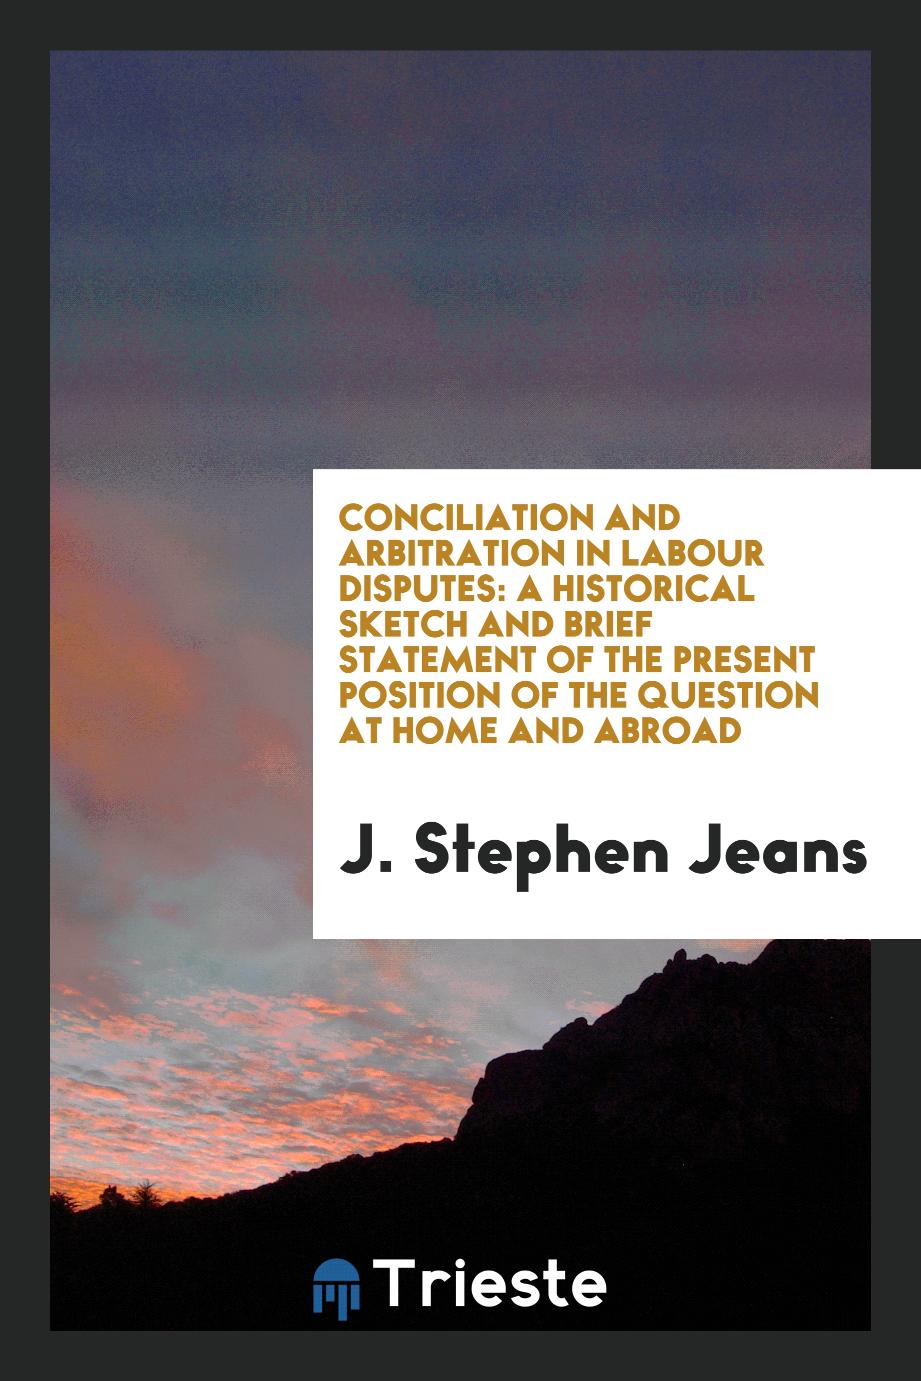 Conciliation and arbitration in labour disputes: a historical sketch and brief statement of the present position of the question at home and abroad